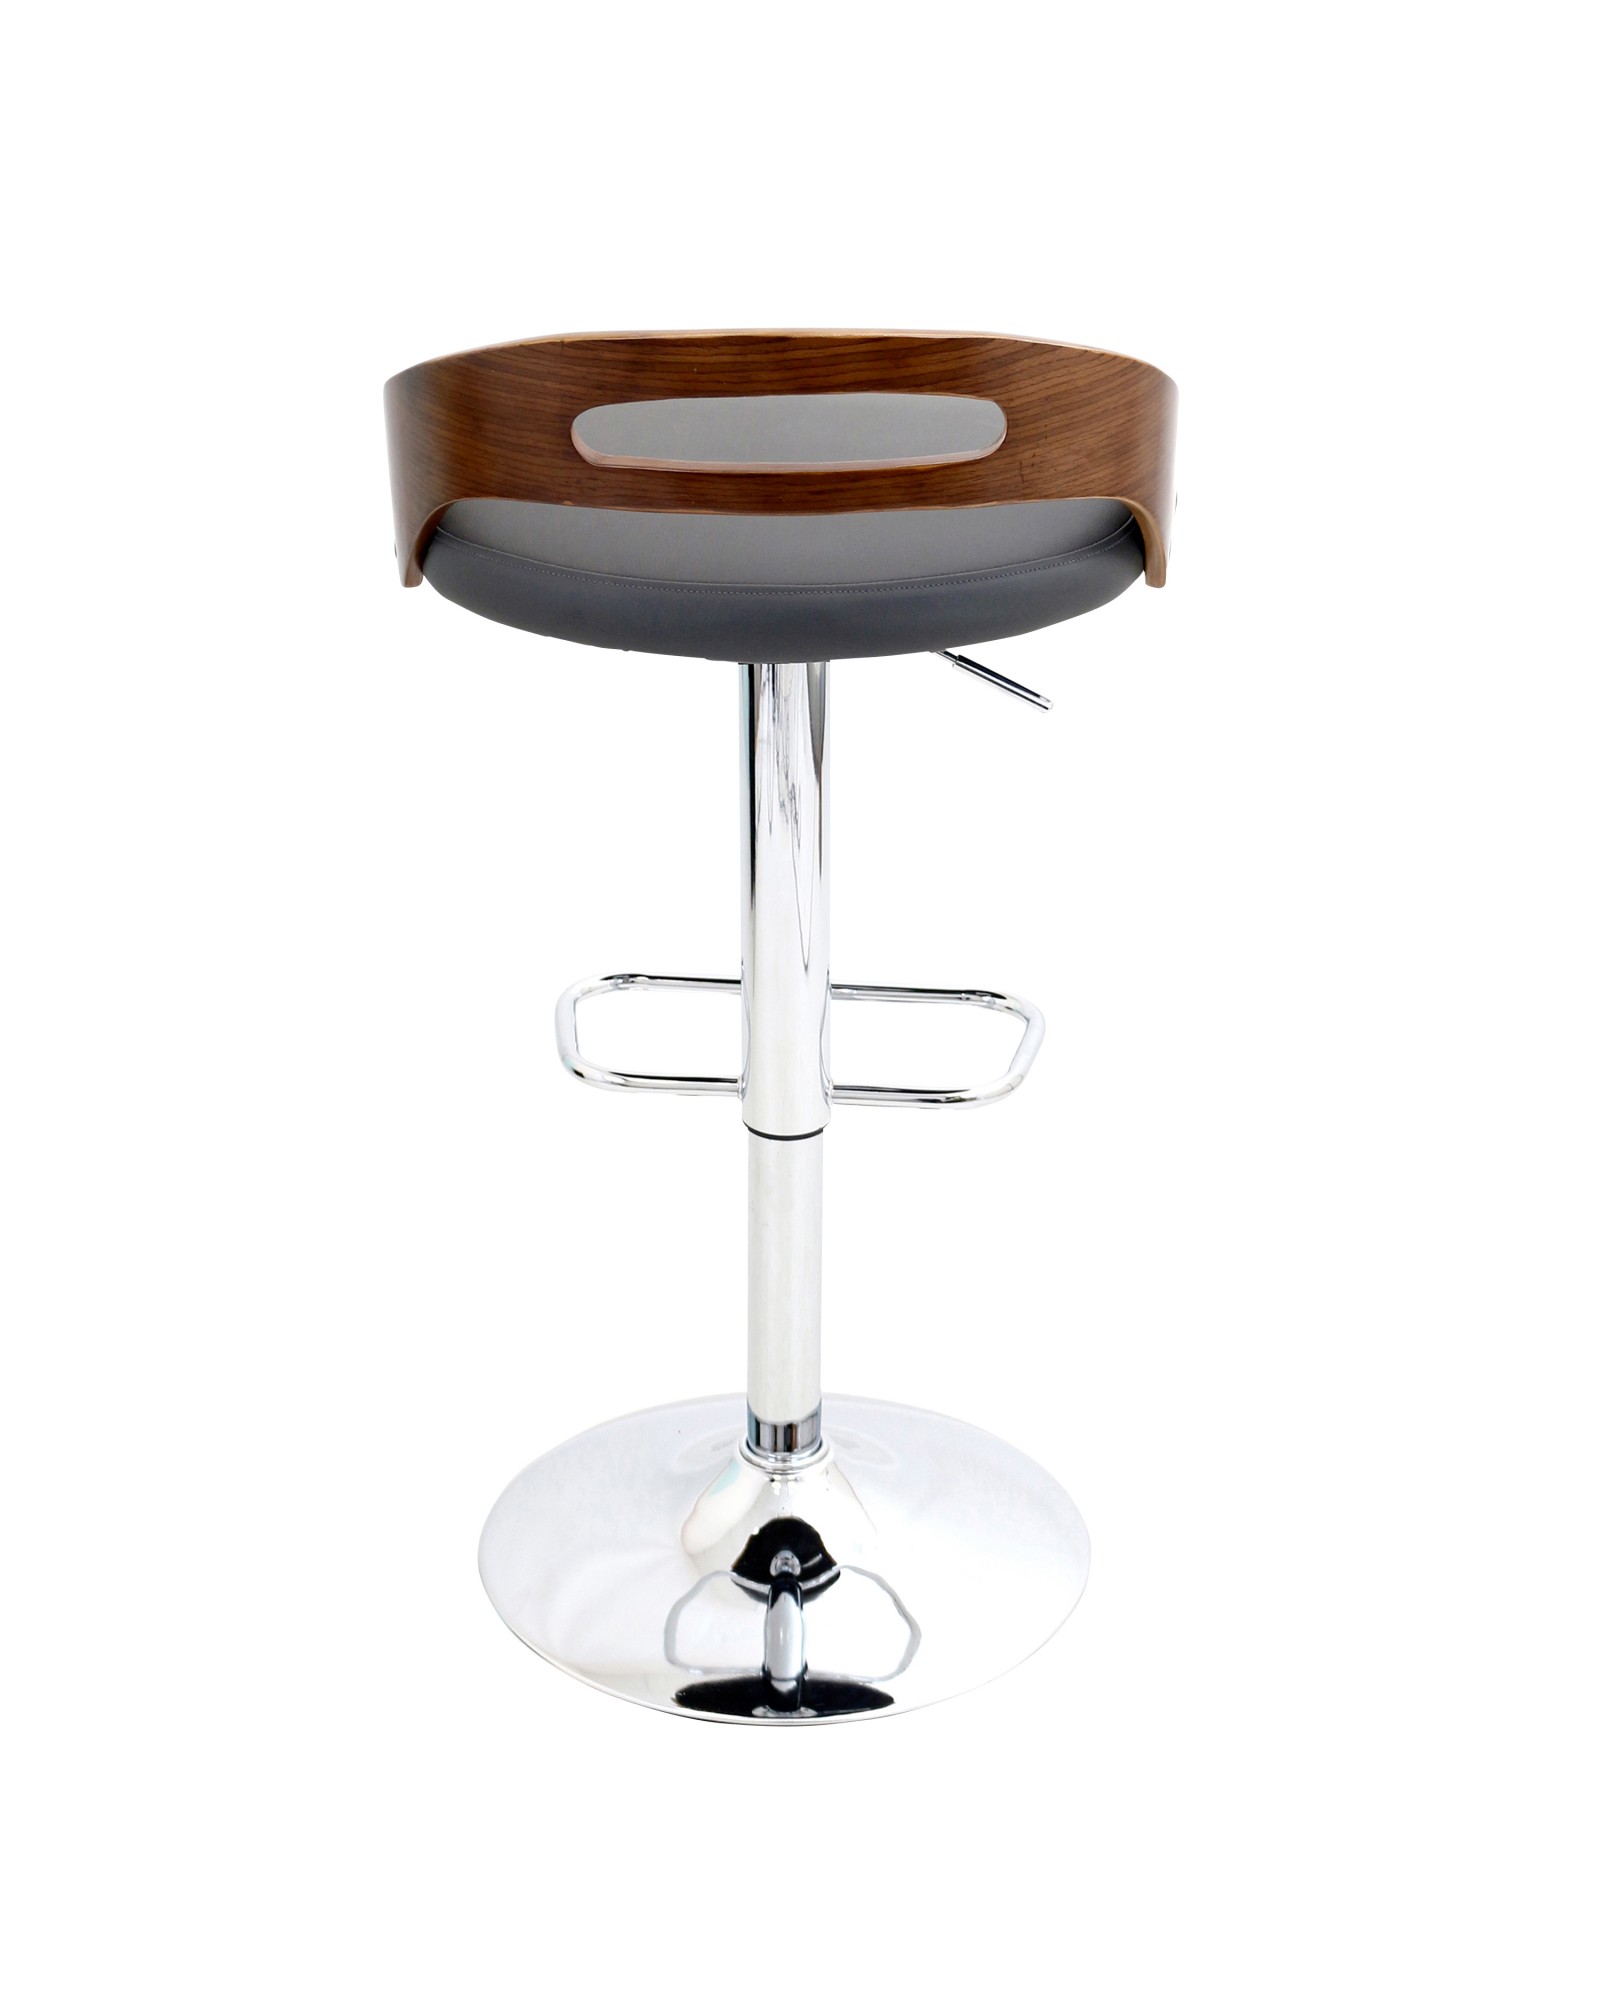 Cassis Mid-Century Modern Adjustable Barstool with Swivel in Walnut and Grey Faux Leather